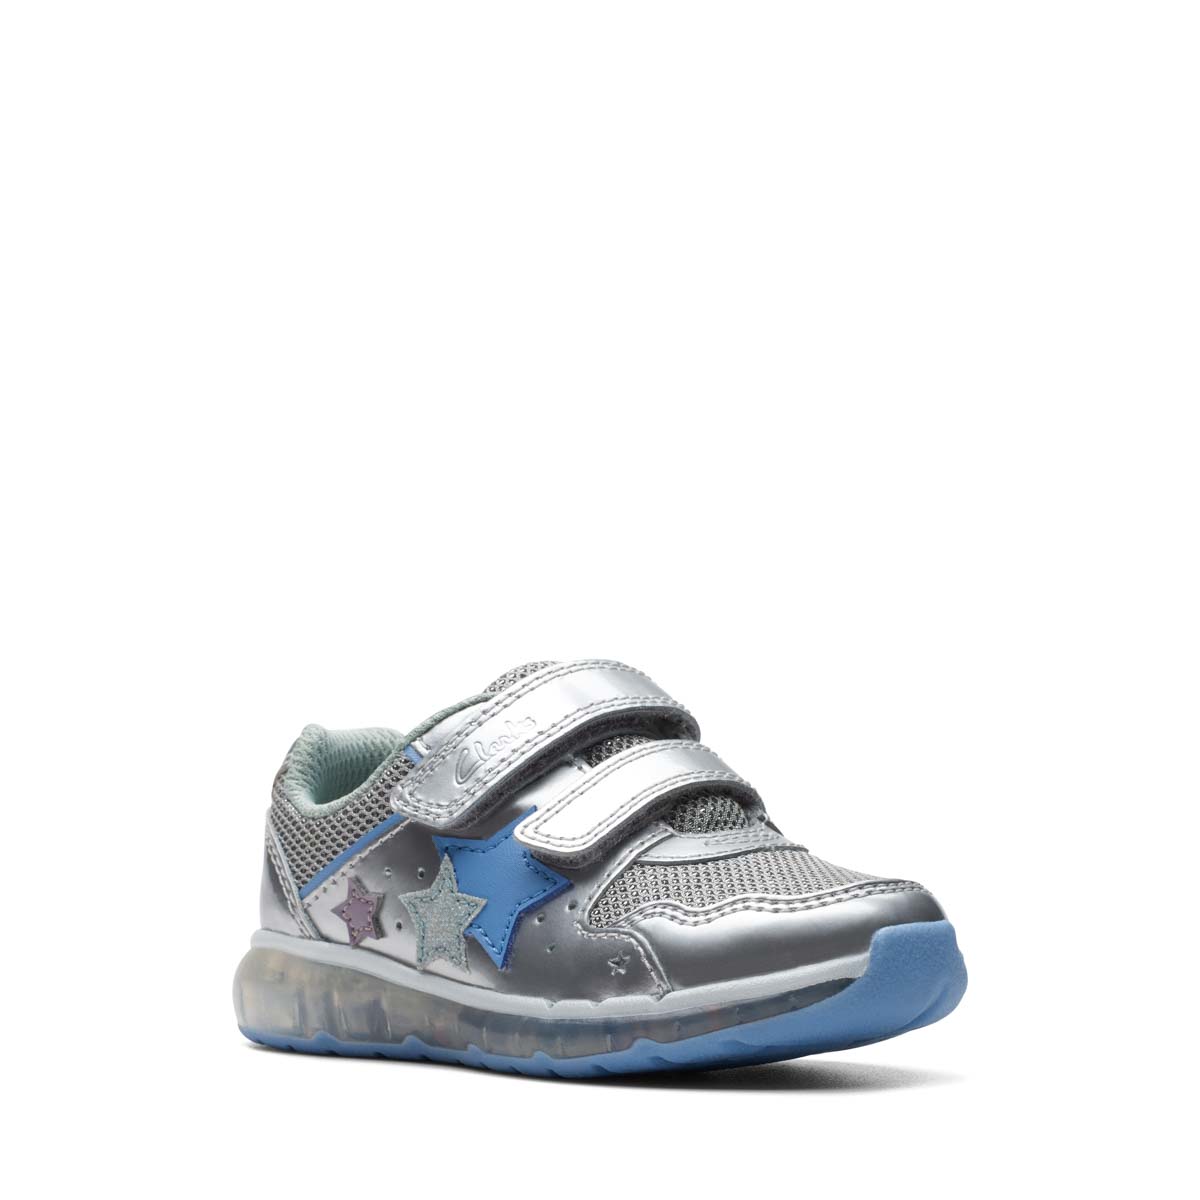 Clarks Spark New T 2V Silver Kids Toddler Girls Trainers 751516F In Size 6.5 In Plain Silver F Width Fitting Regular Fit